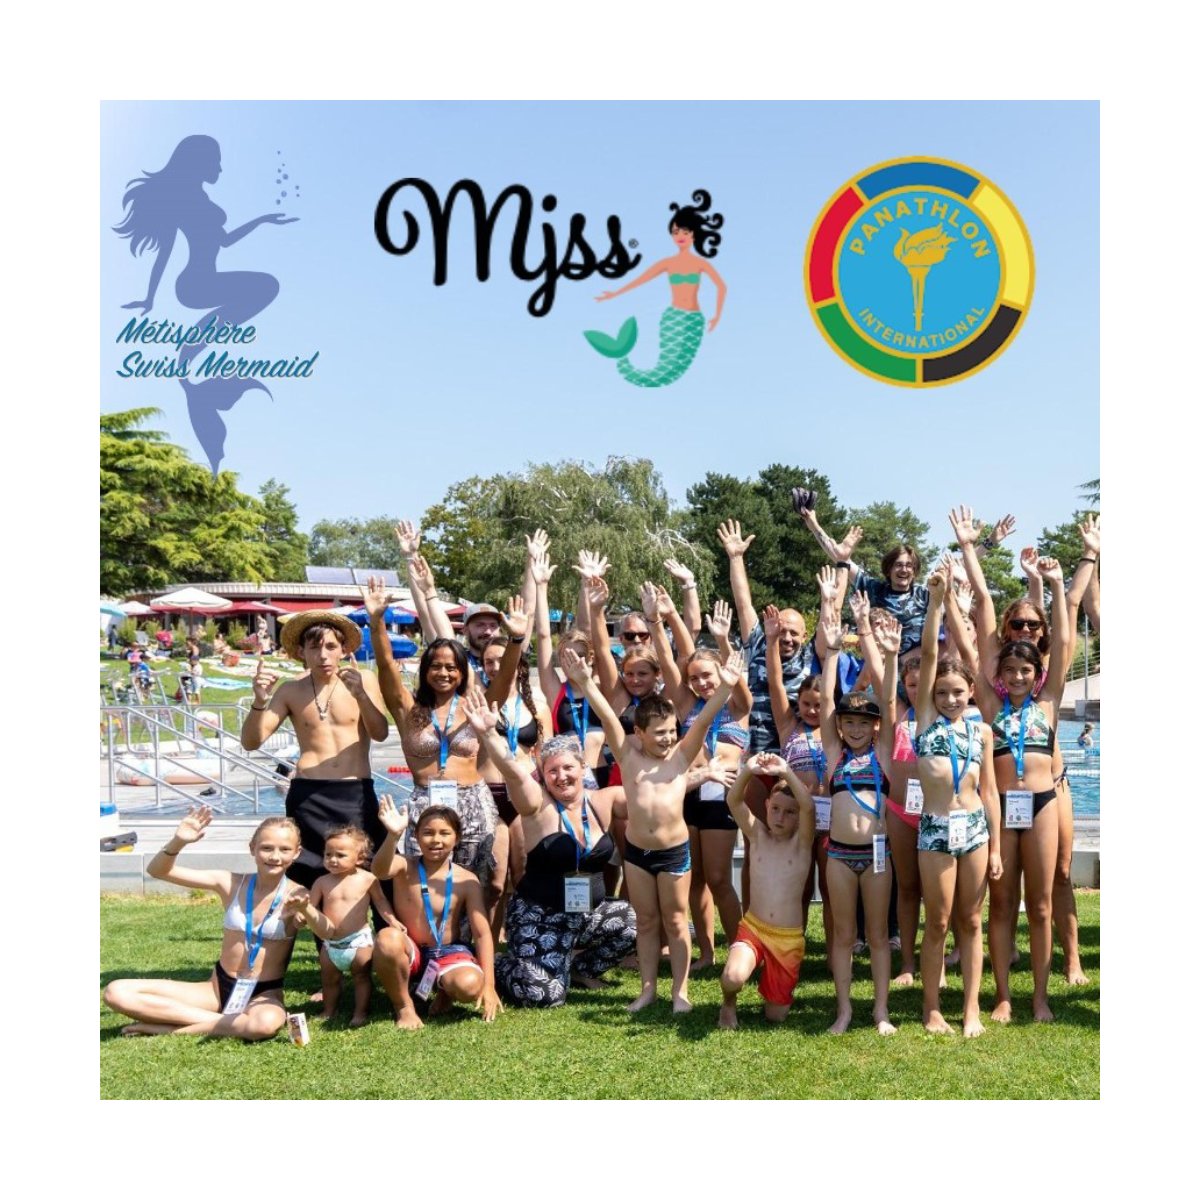 Metis\' Immersion Live Challenge - An unforgettable event! - Mermaid swimm event